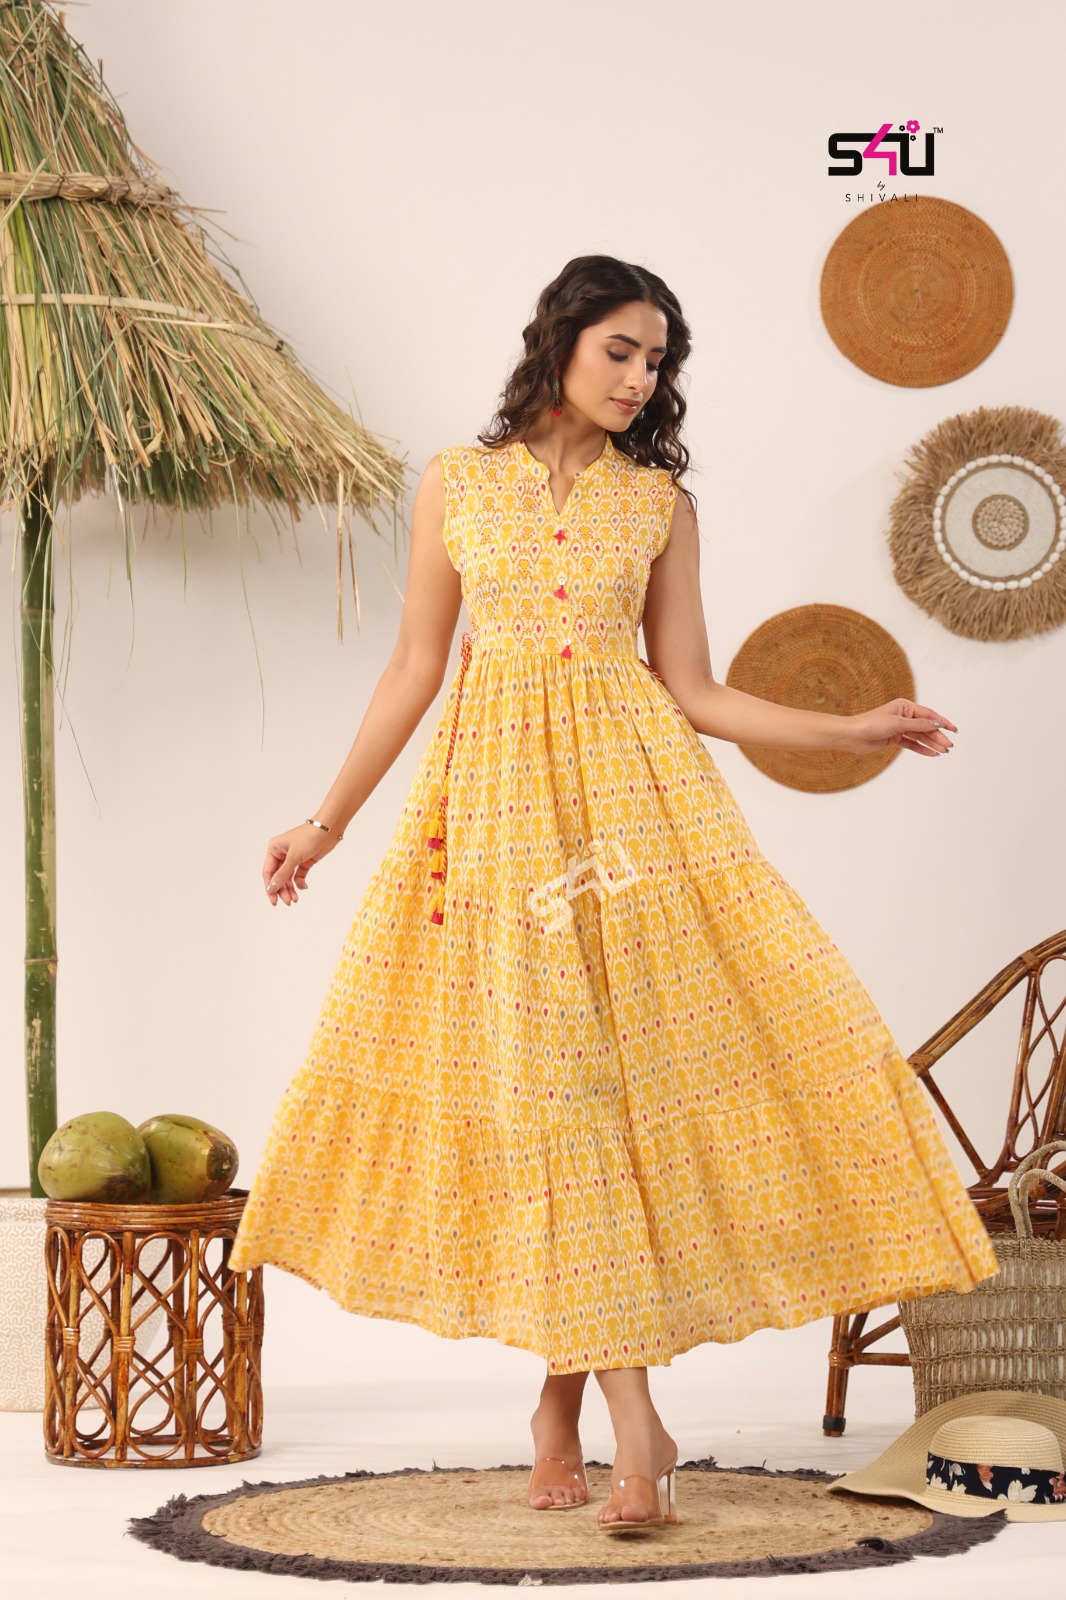 s4U Kurtis Flairy Tales vol 9 Gowns Catalog collection 2